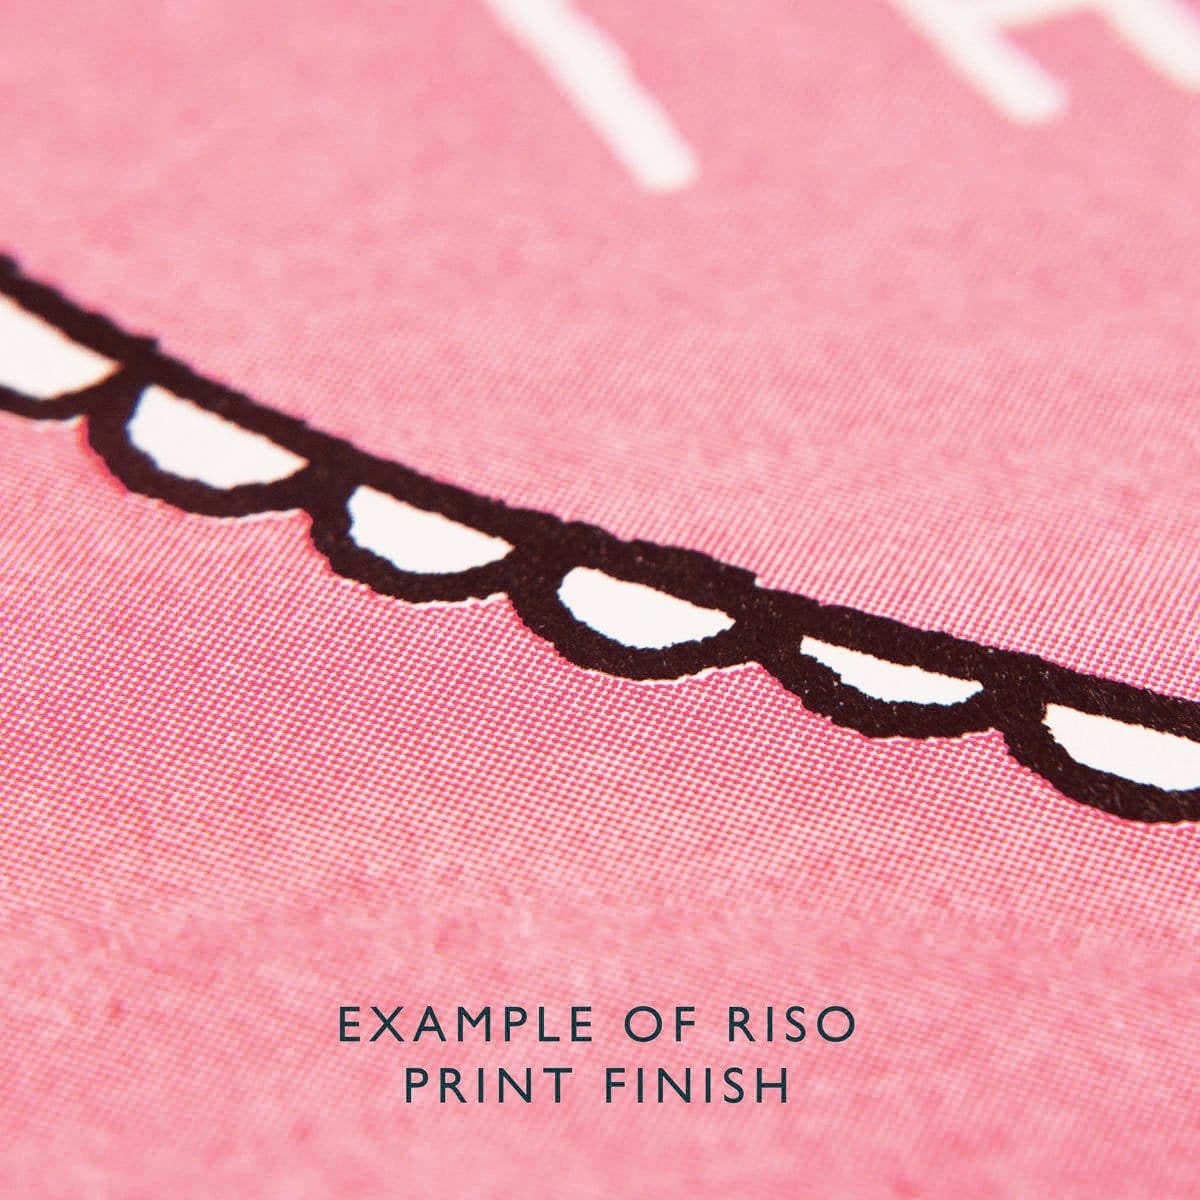 Pale pink riso print finish for art print 